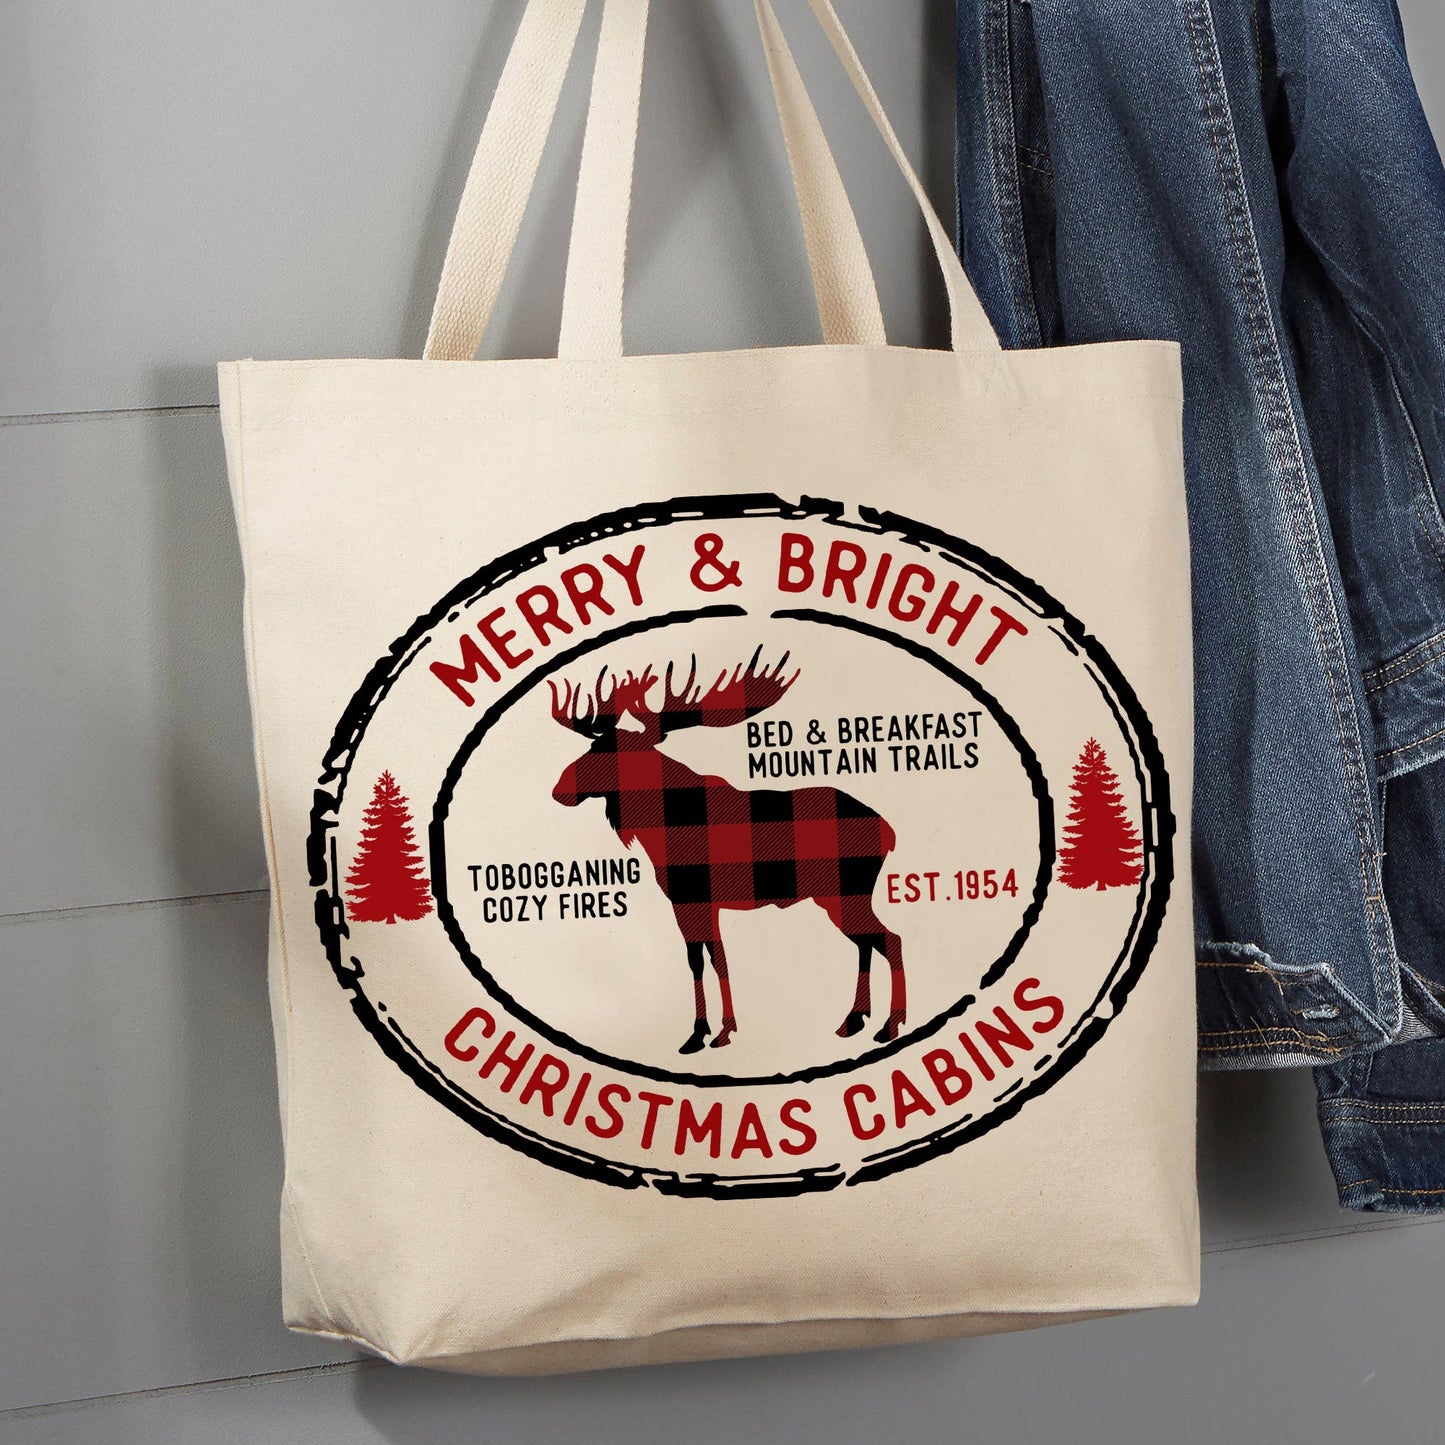 Merry and Bright Christmas Cabins, 12 oz  Tote Bag